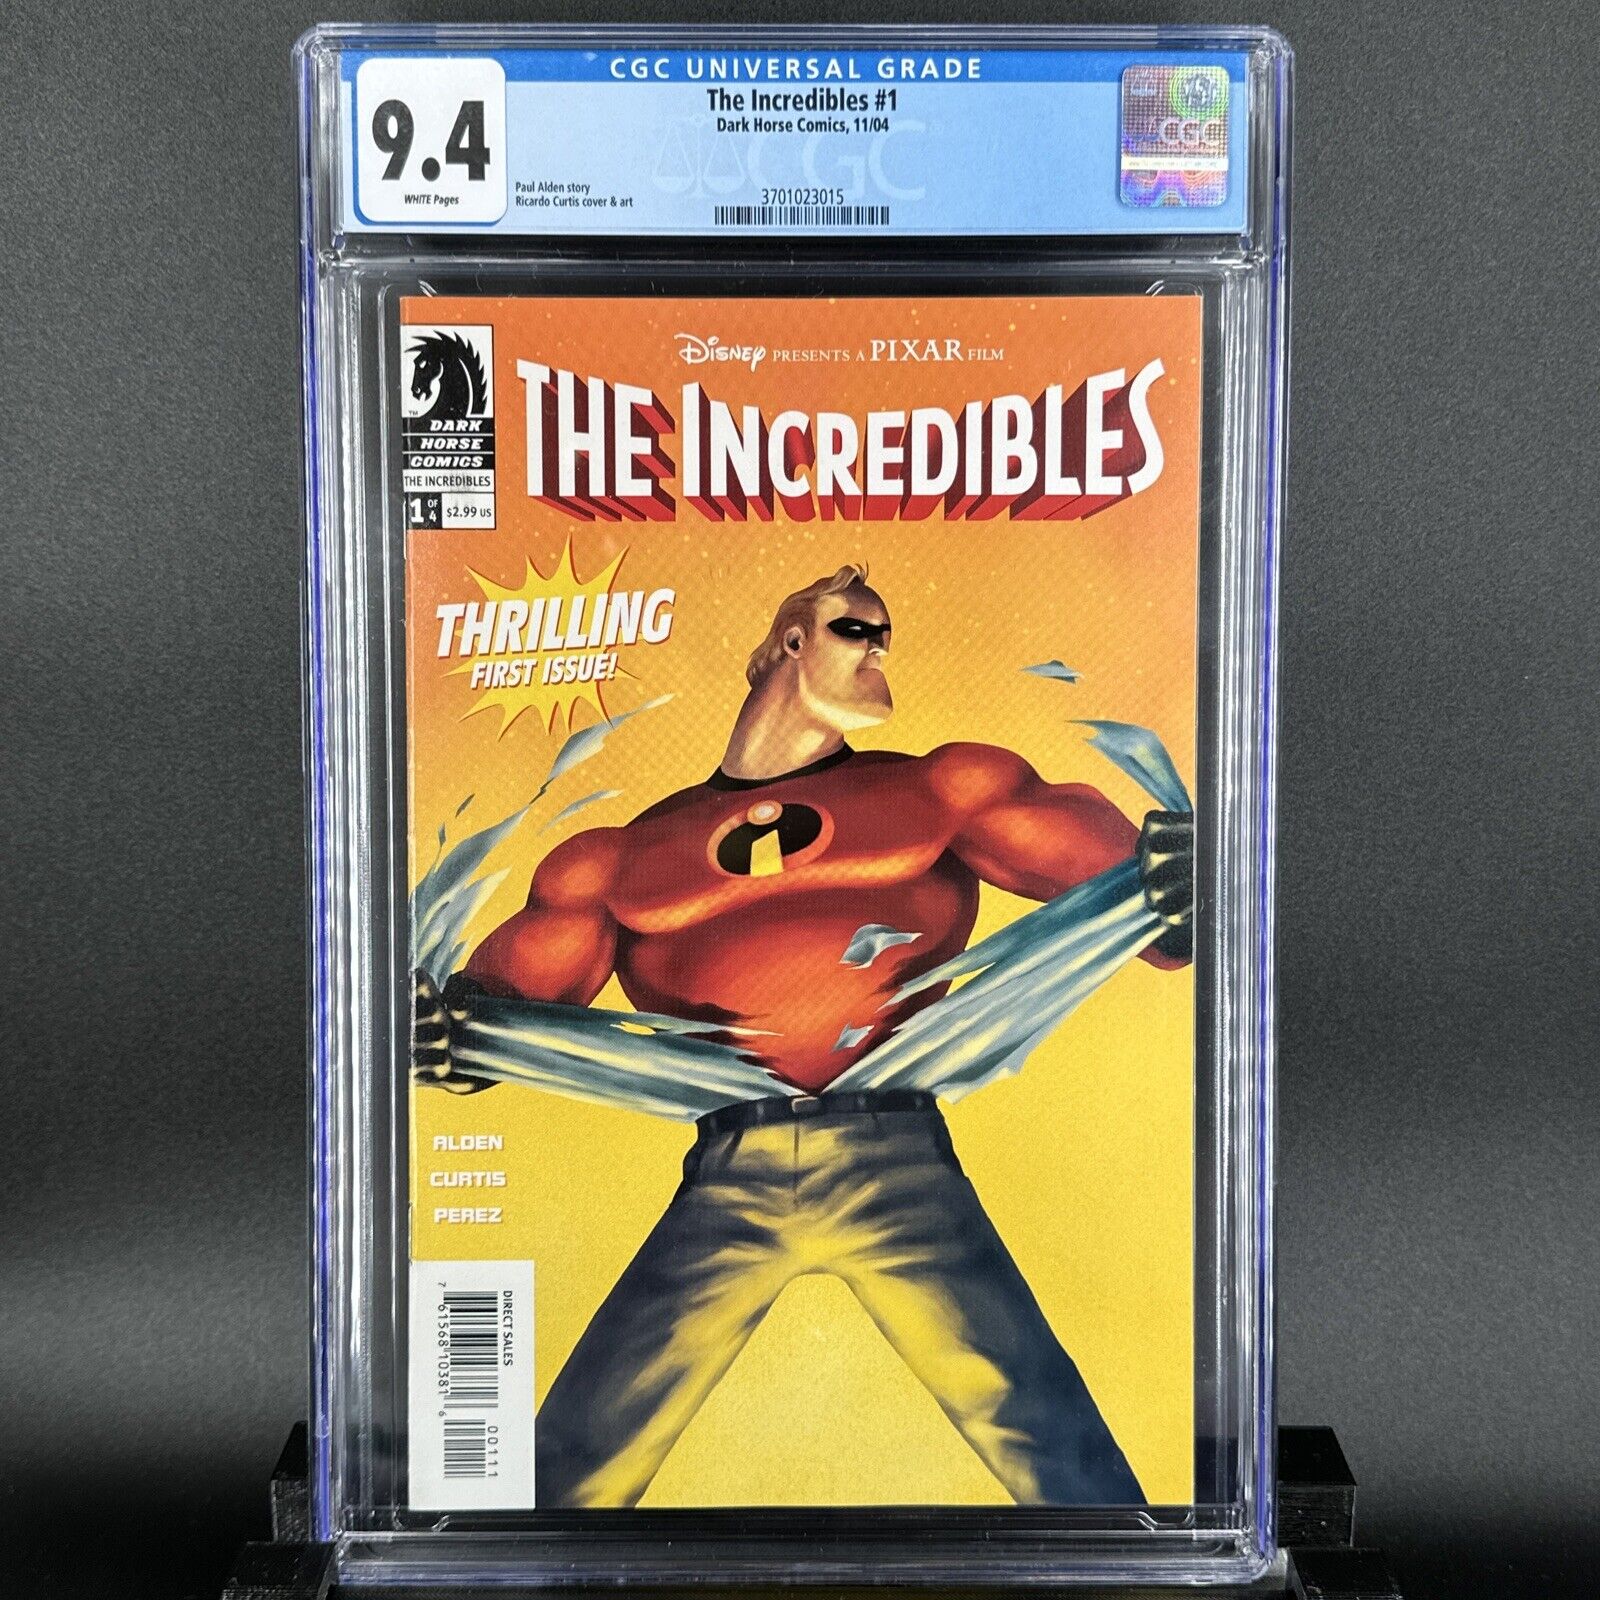 THE INCREDIBLES #1 MT 9.4 CGC WHITE PAGES ALDEN STORY CURTIS COVER AND ART